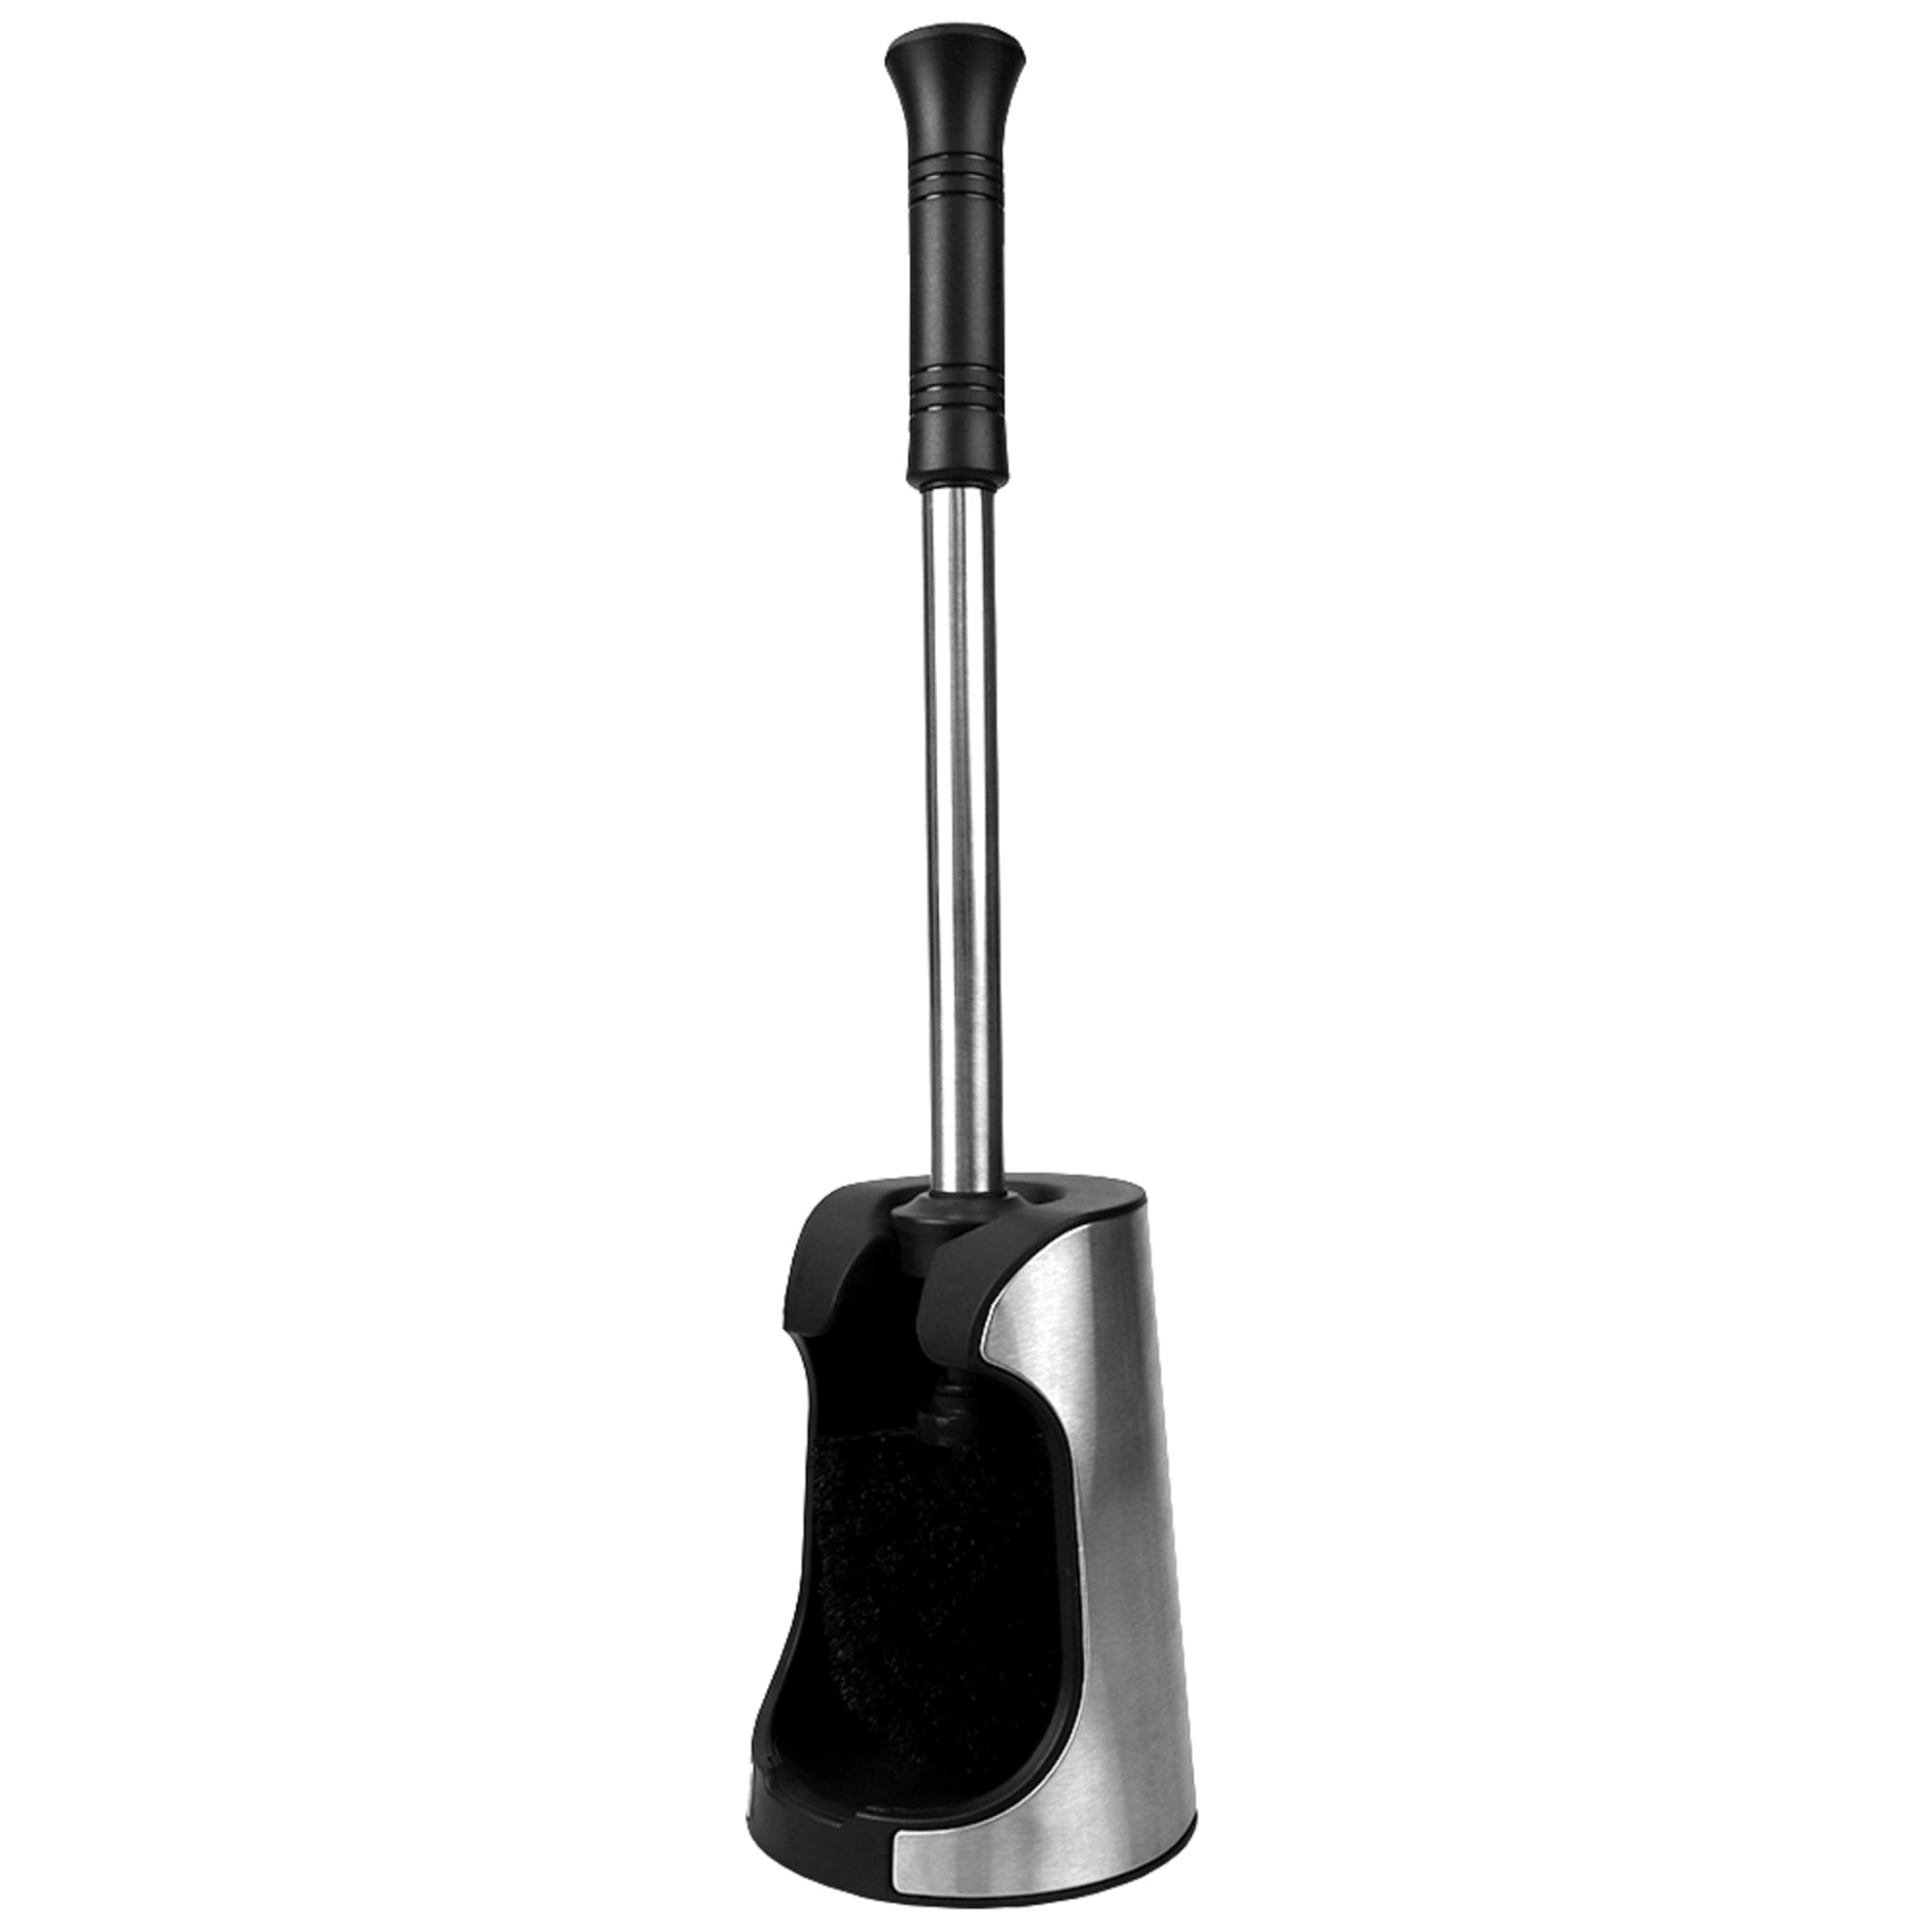 Home Basics Brushed Stainless Toilet Brush with Holder and Comfort Grip Handle with Easy to Store Compact Non-Skid Caddy, Black $10.00 EACH, CASE PACK OF 12